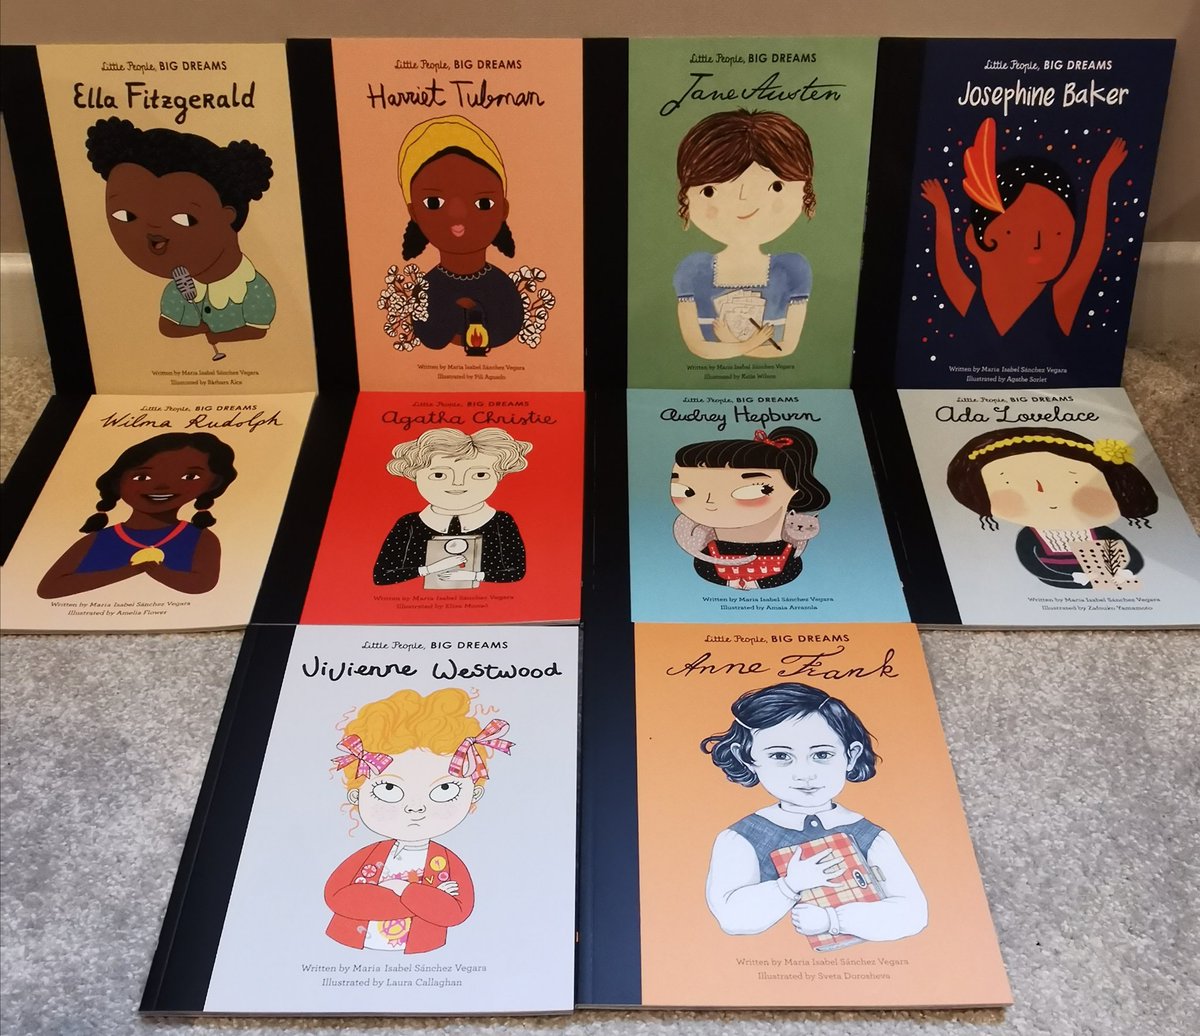 🎉 BOOK GIVEAWAY 🎉 To celebrate #BookGivingDay on Tuesday 14th February, we are giving away not 1, but 10 of these wonderful Little People, Big Dreams books. To #win, simply: 👣 Follow @LbQorg 🔃 Retweet 🥳 Winner announced 15th February. (UK only) 🌟 Good luck! #LbQ